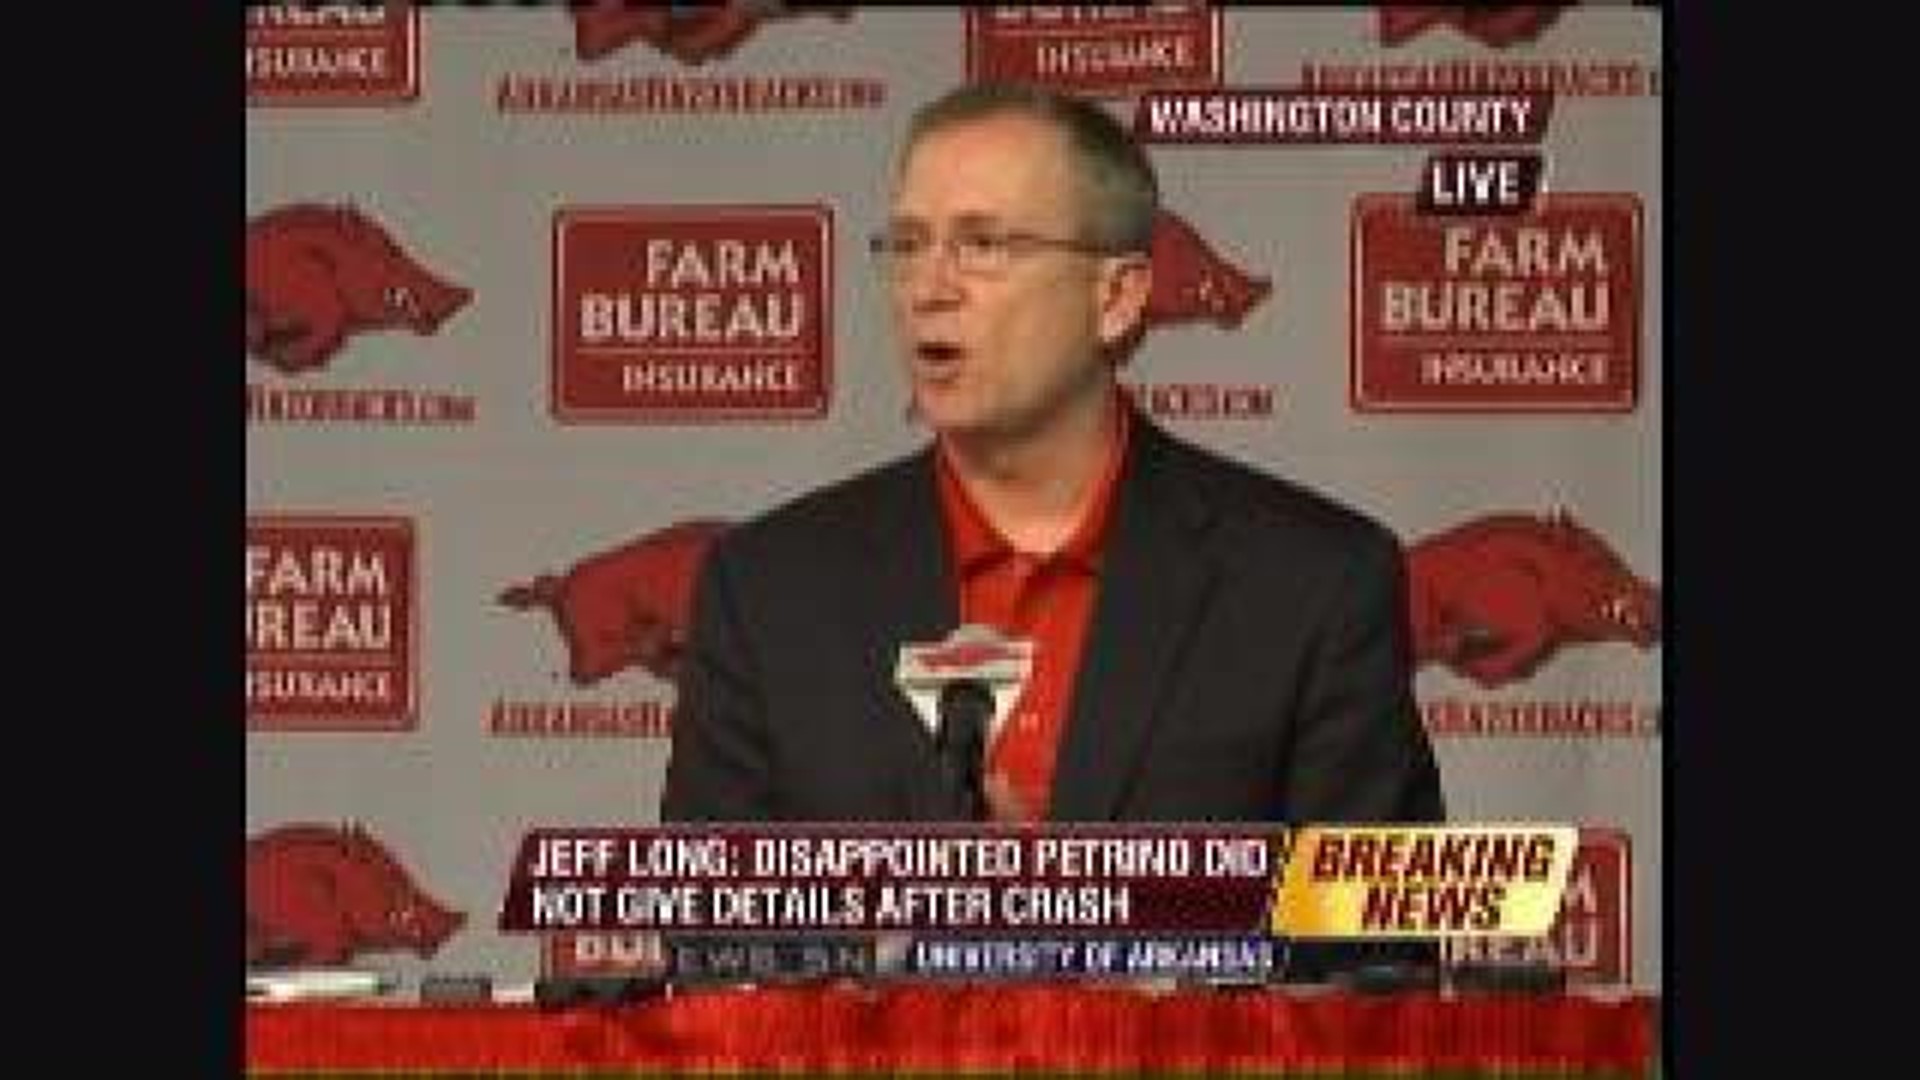 Jeff Long Press Conference on Petrino's Accident